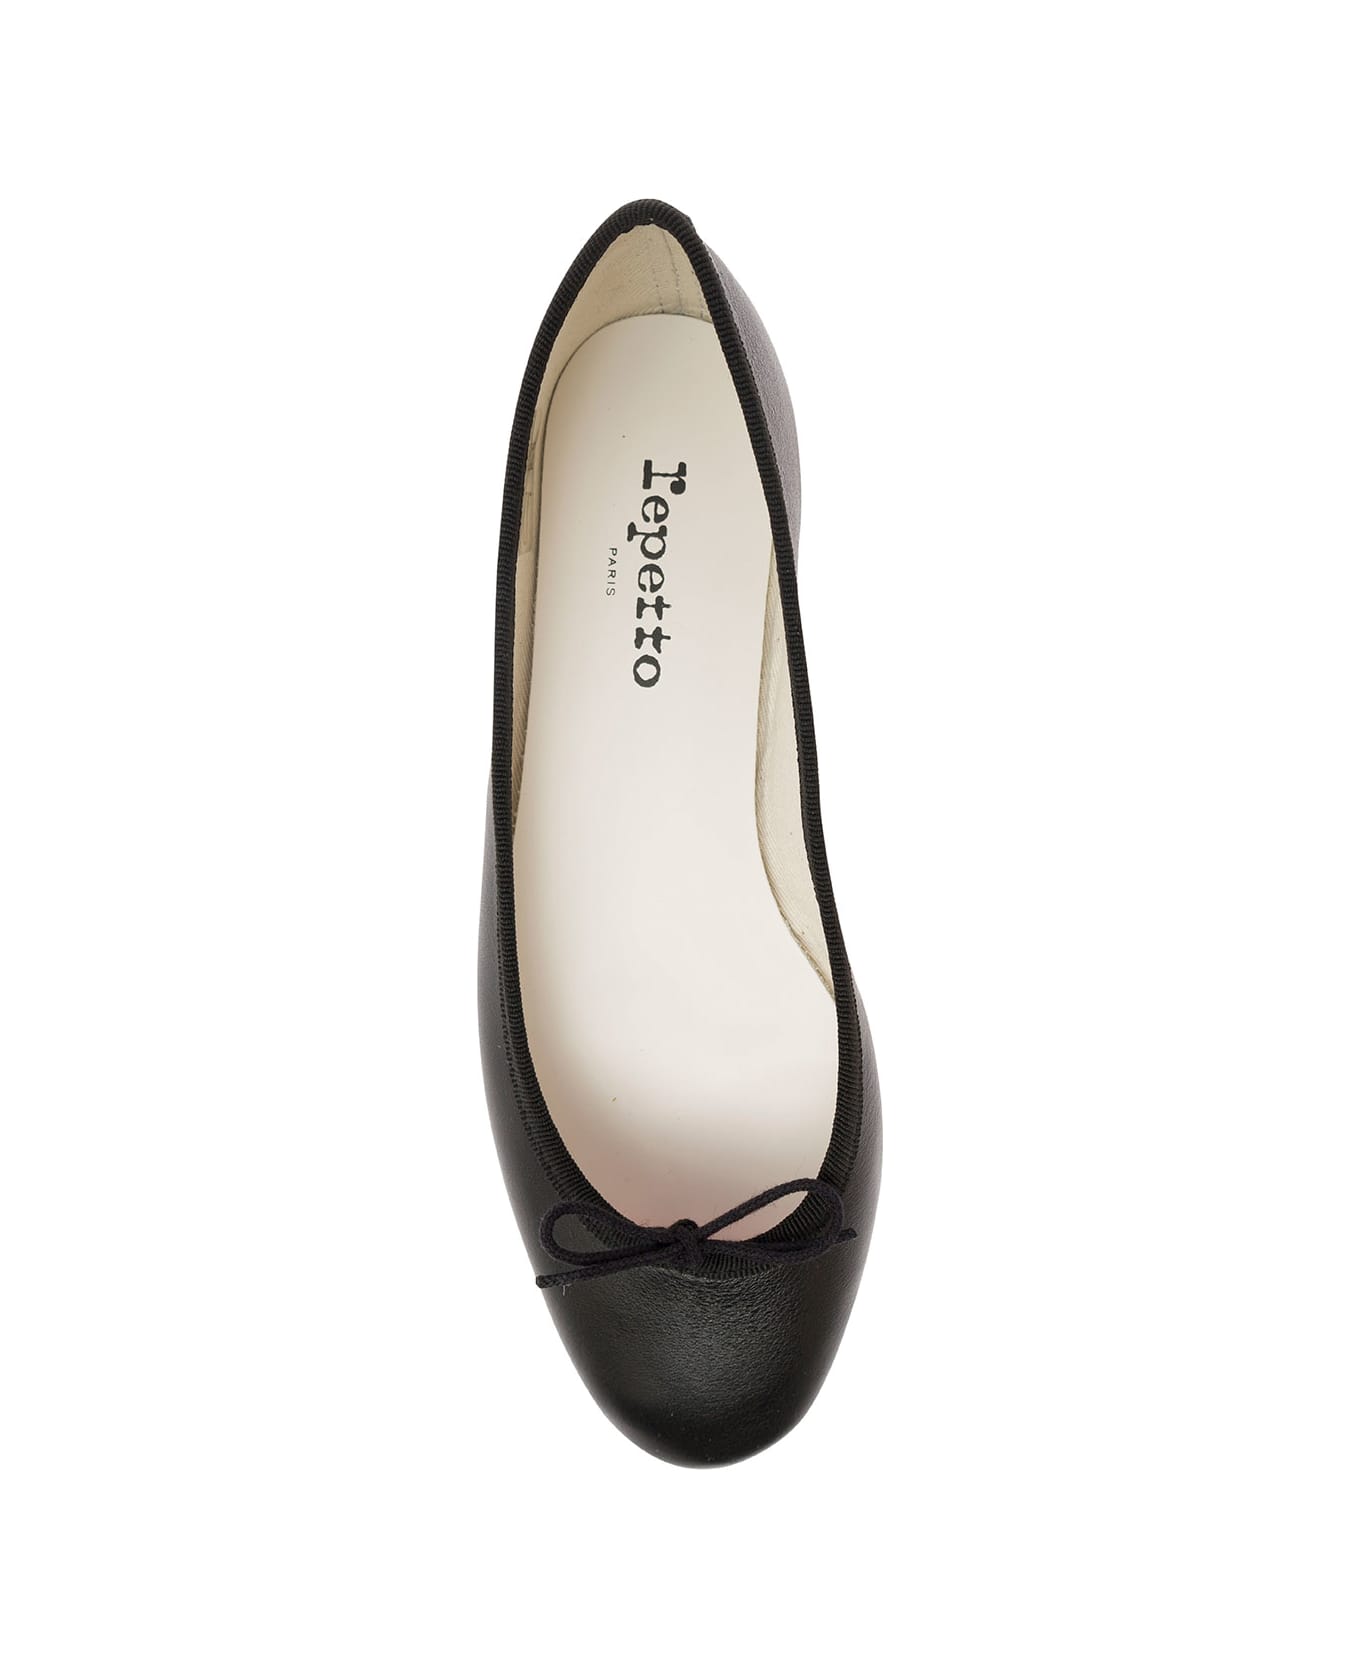 Repetto 'cendrillon' Black Ballet Flats With Bow Detail In Smooth Leather Woman - Black